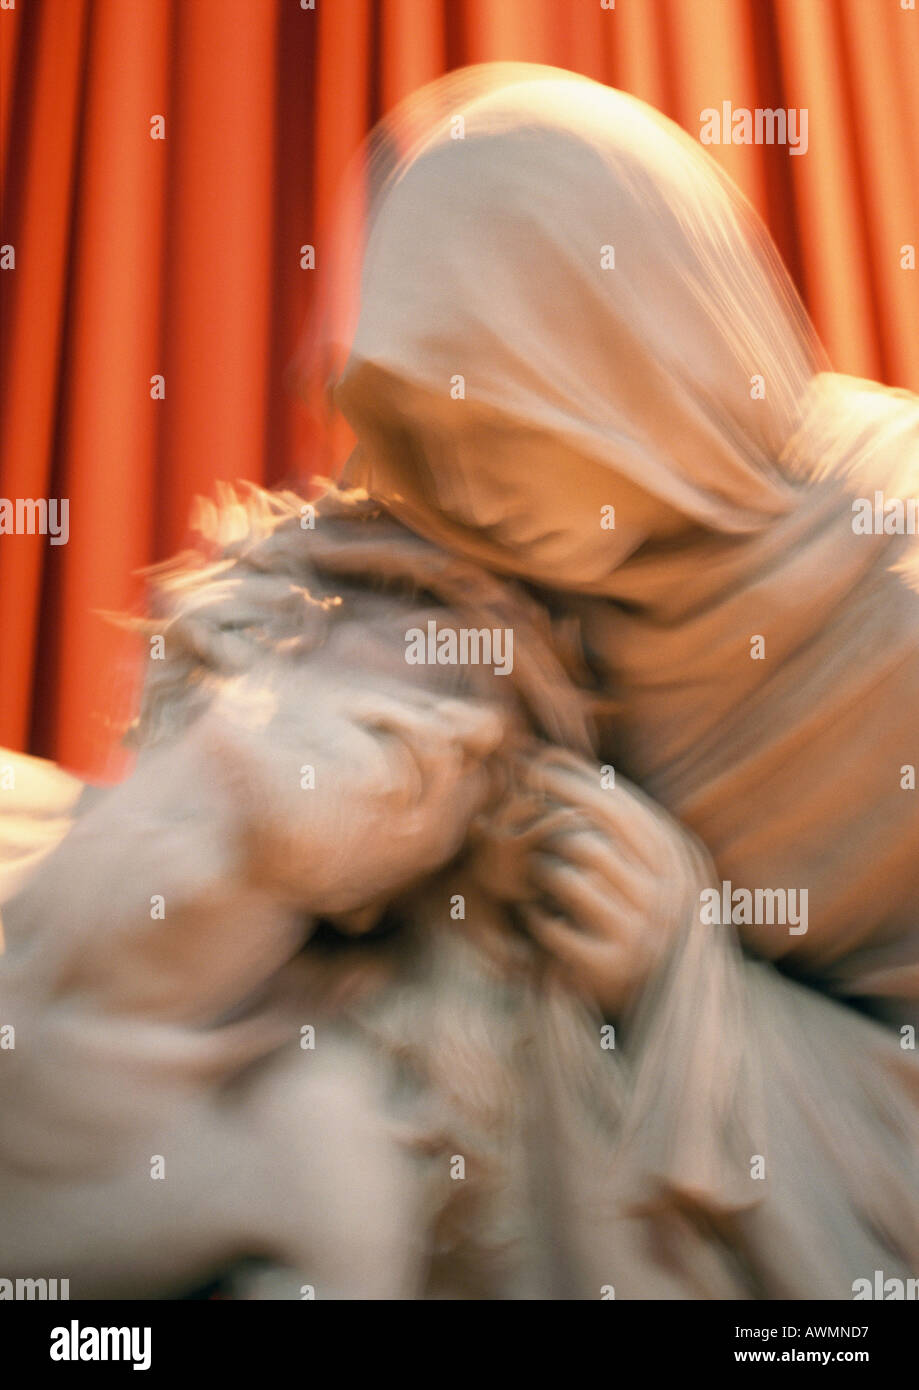 Statue of Virgin Mary and Christ, blurred Stock Photo